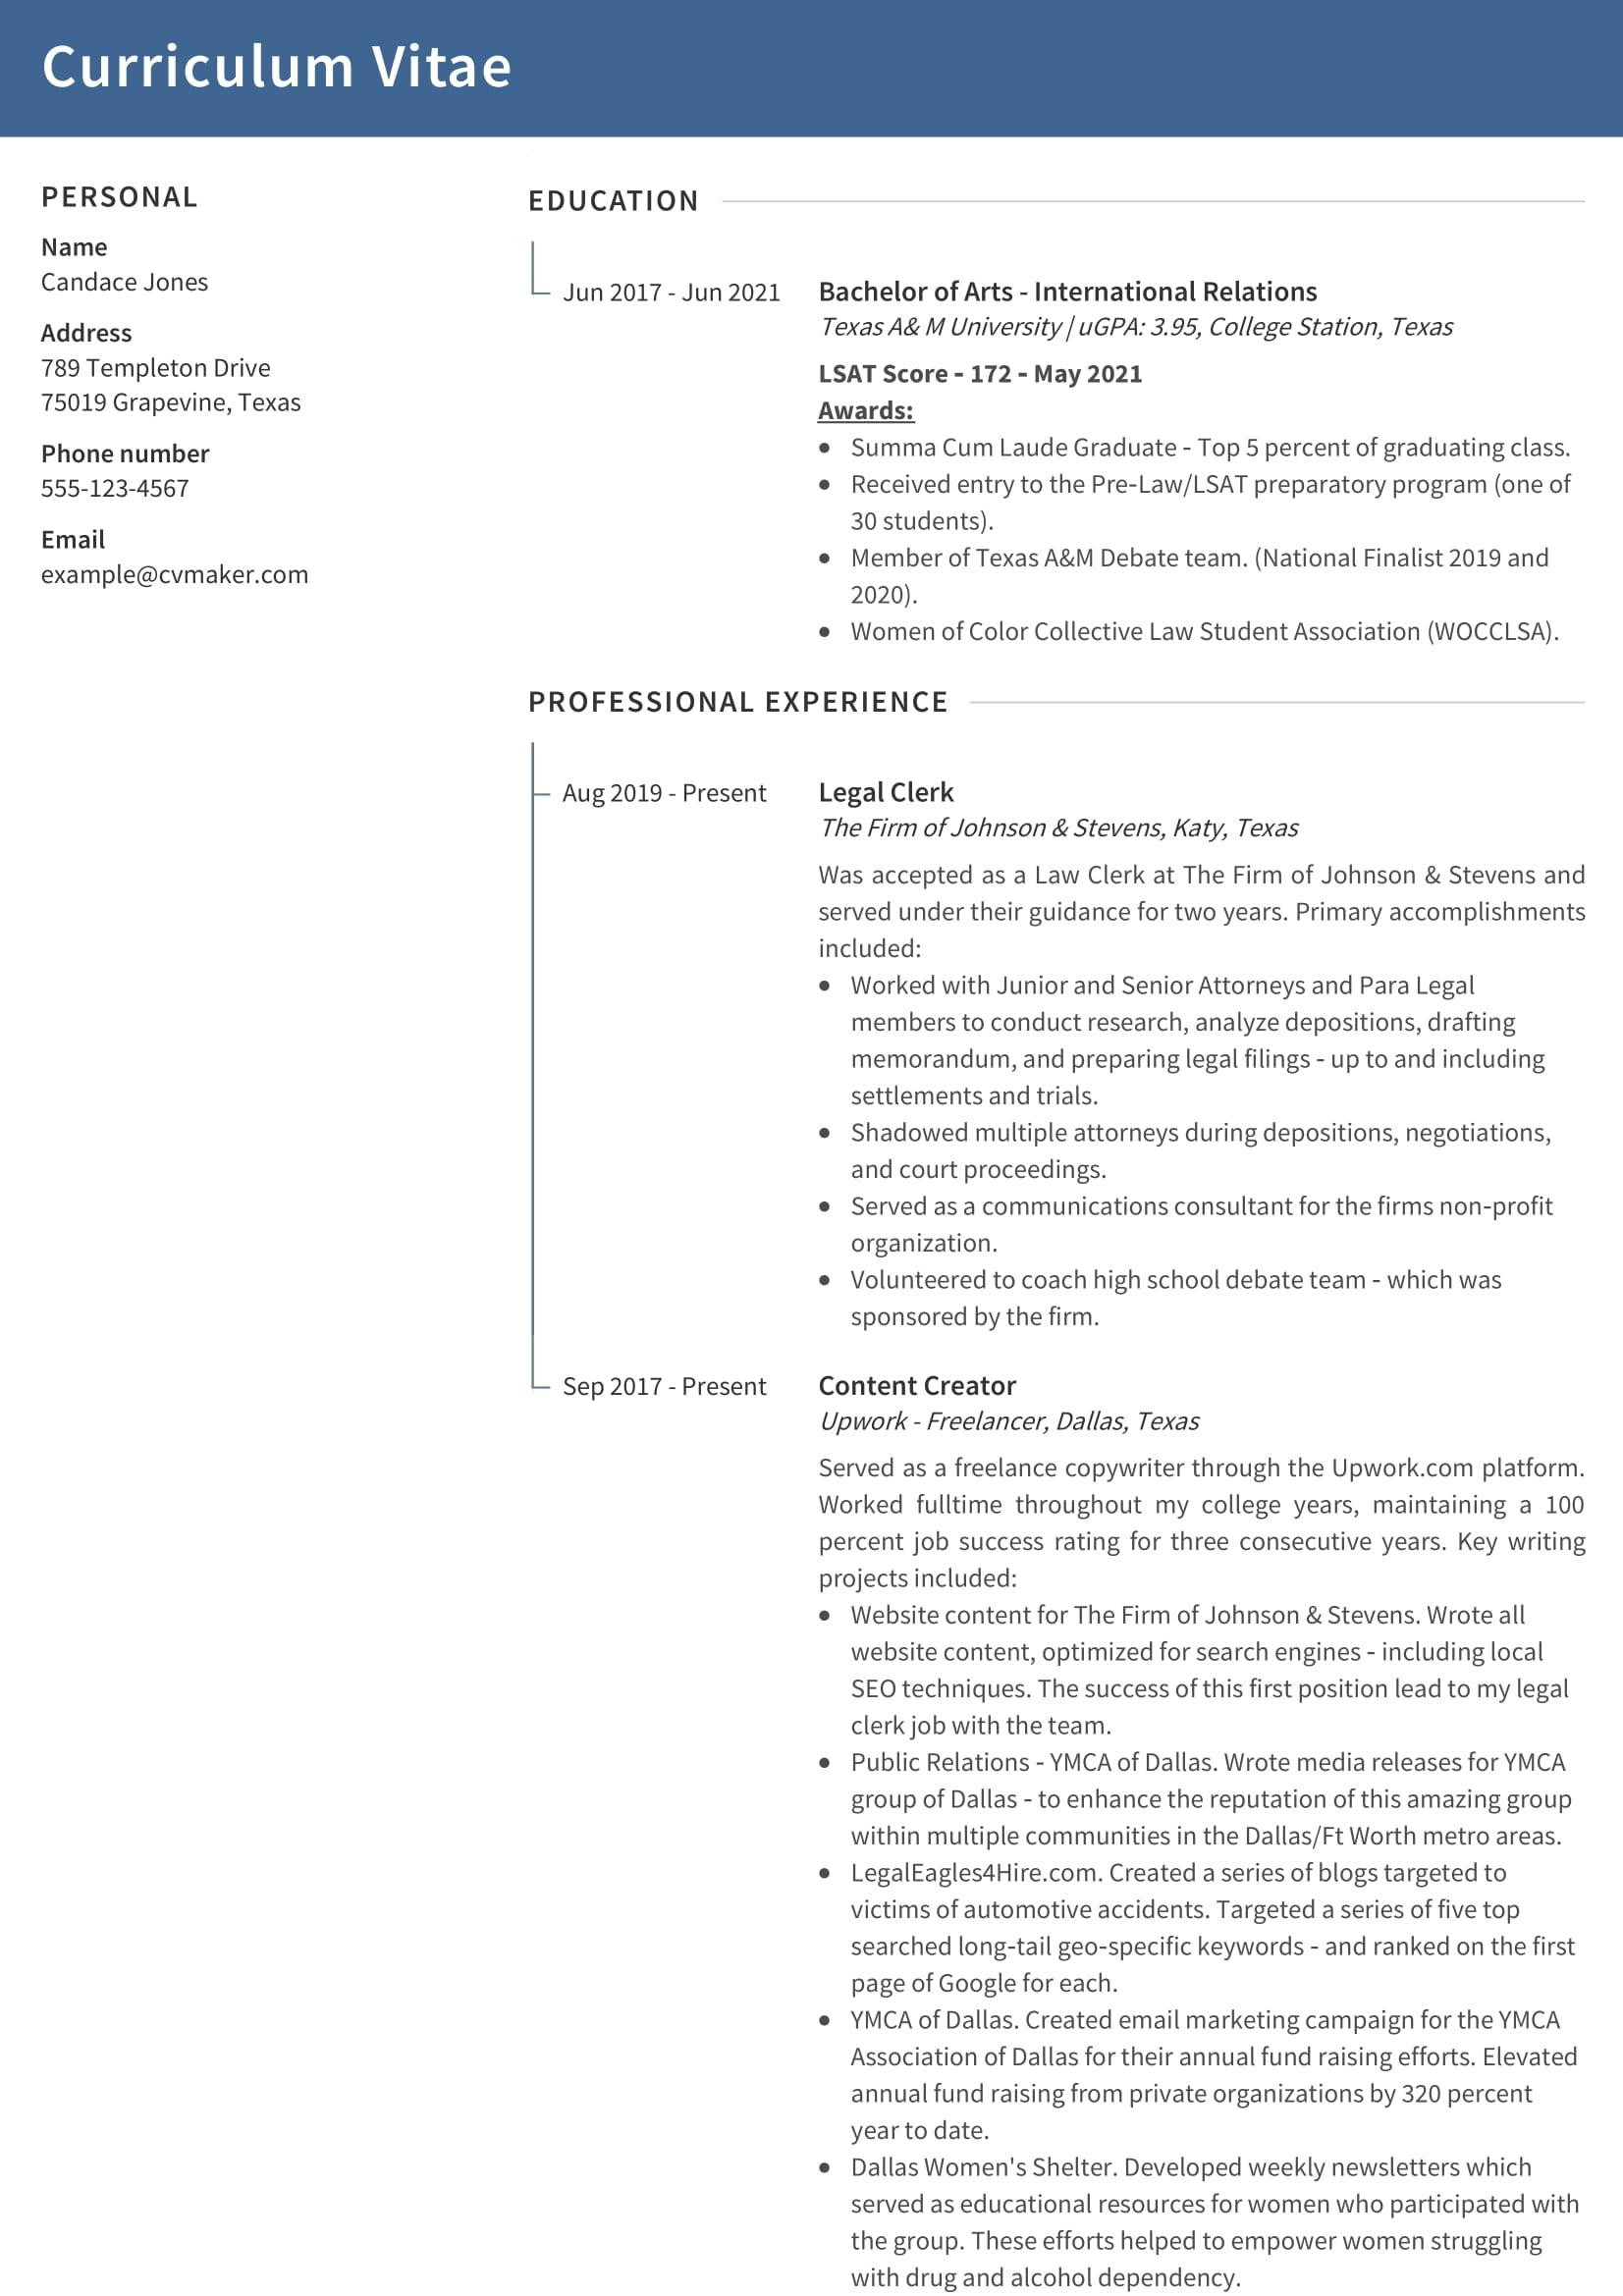 Sample Resume for Law School Graduate Law School Resume Example & How to Write Tips 2021 – Cvmaker.com